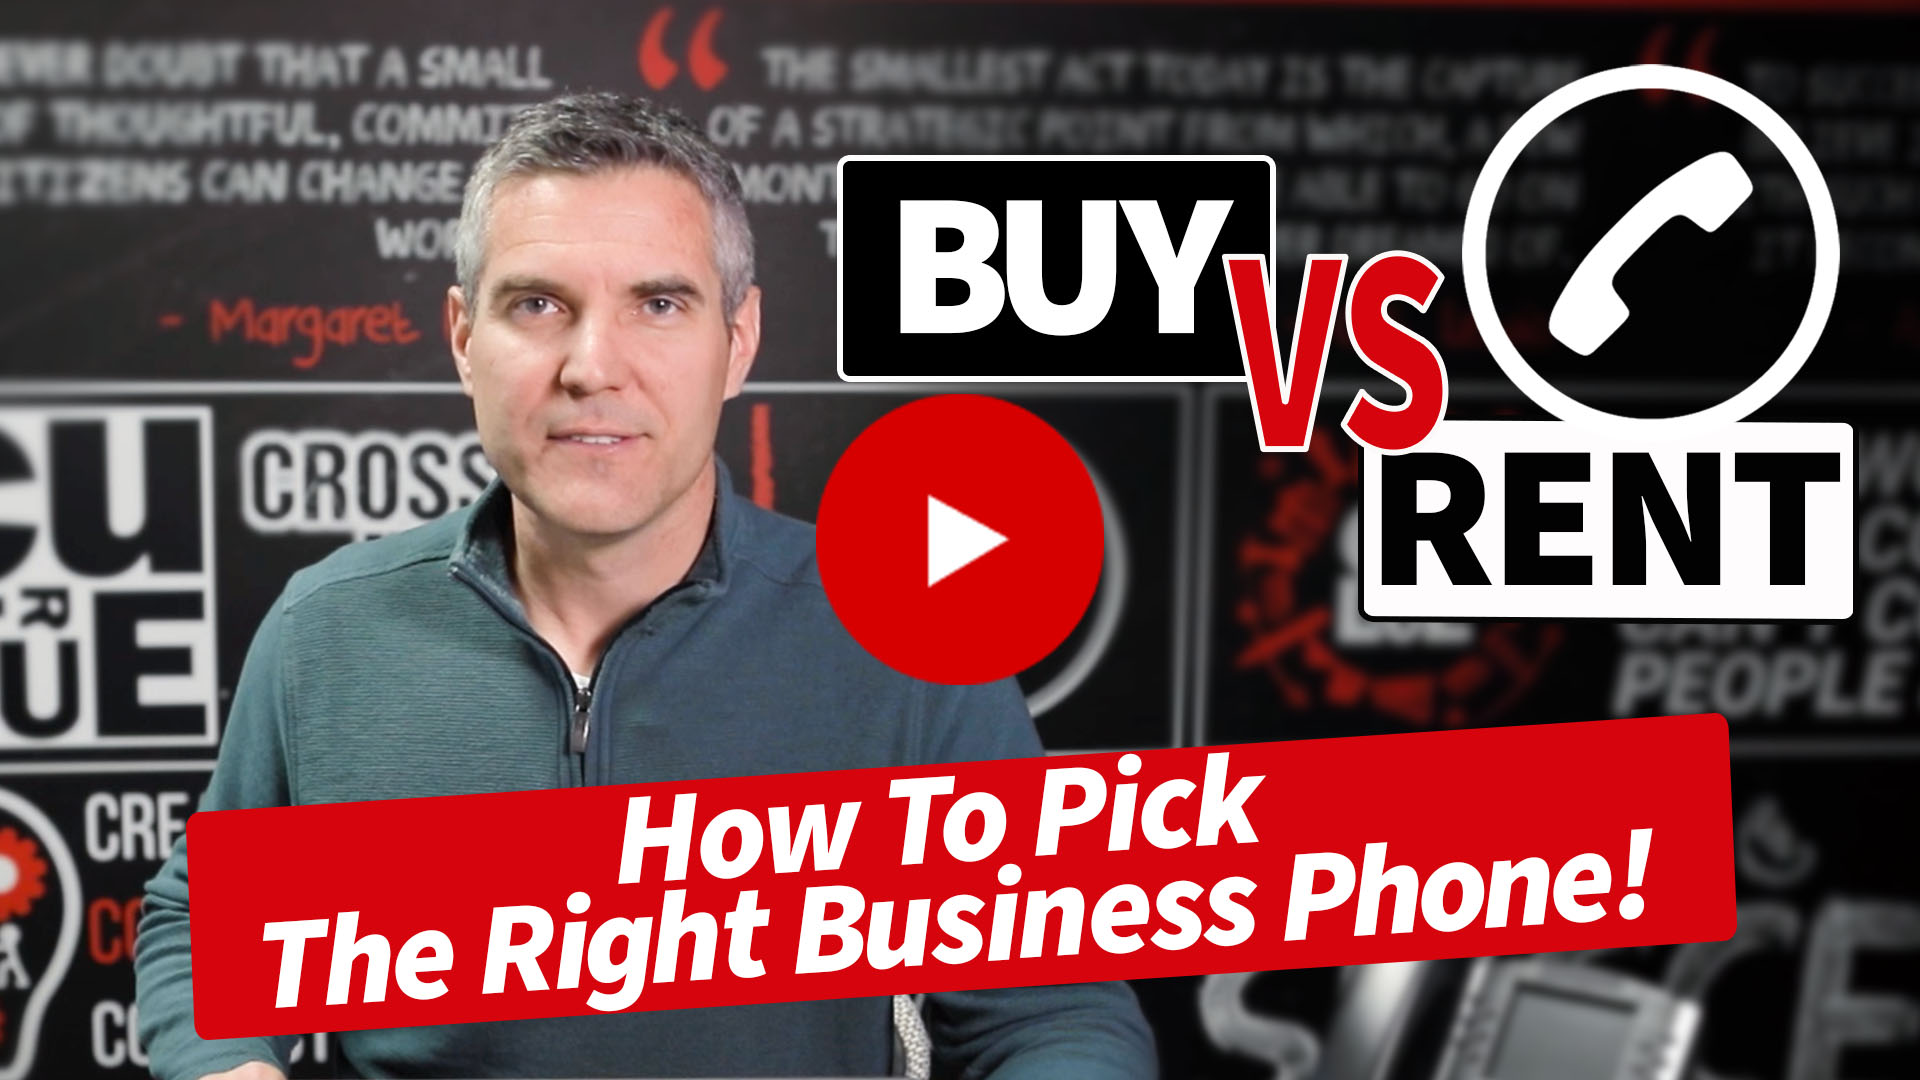 Buying vs. Renting How to Pick The Right Business Phone